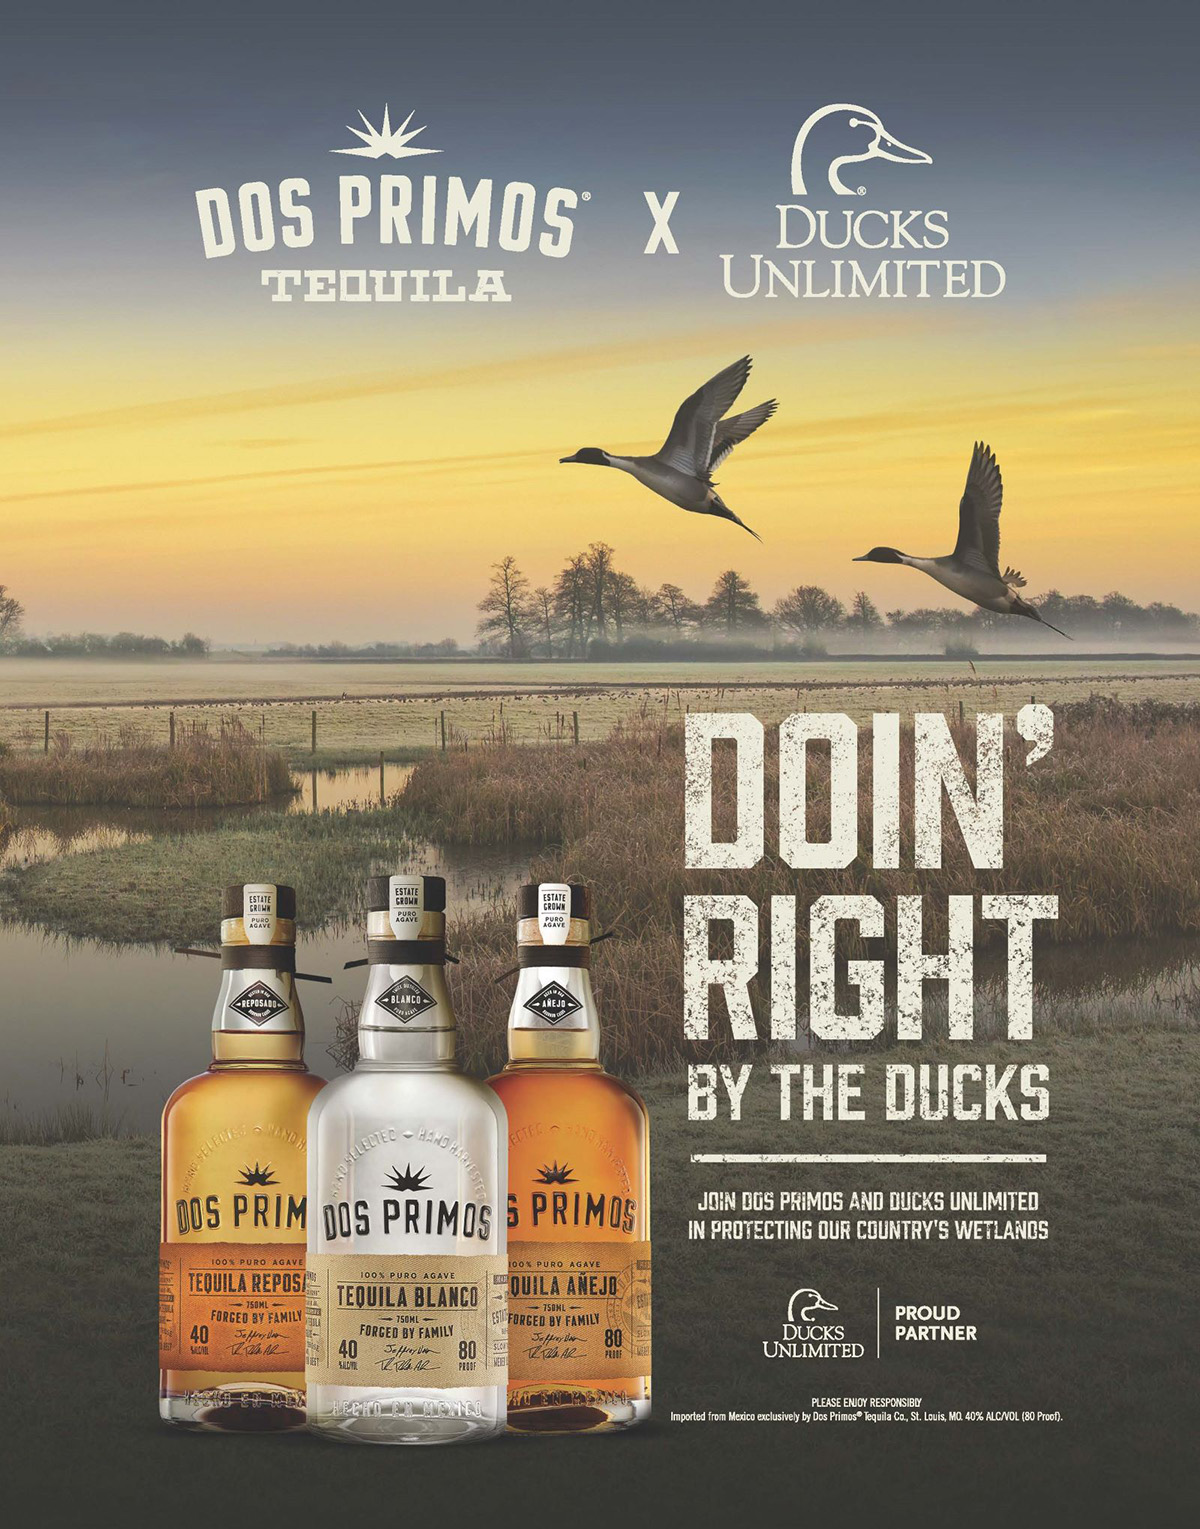 Dos Primos Tequila is the newest Proud Partner of DU